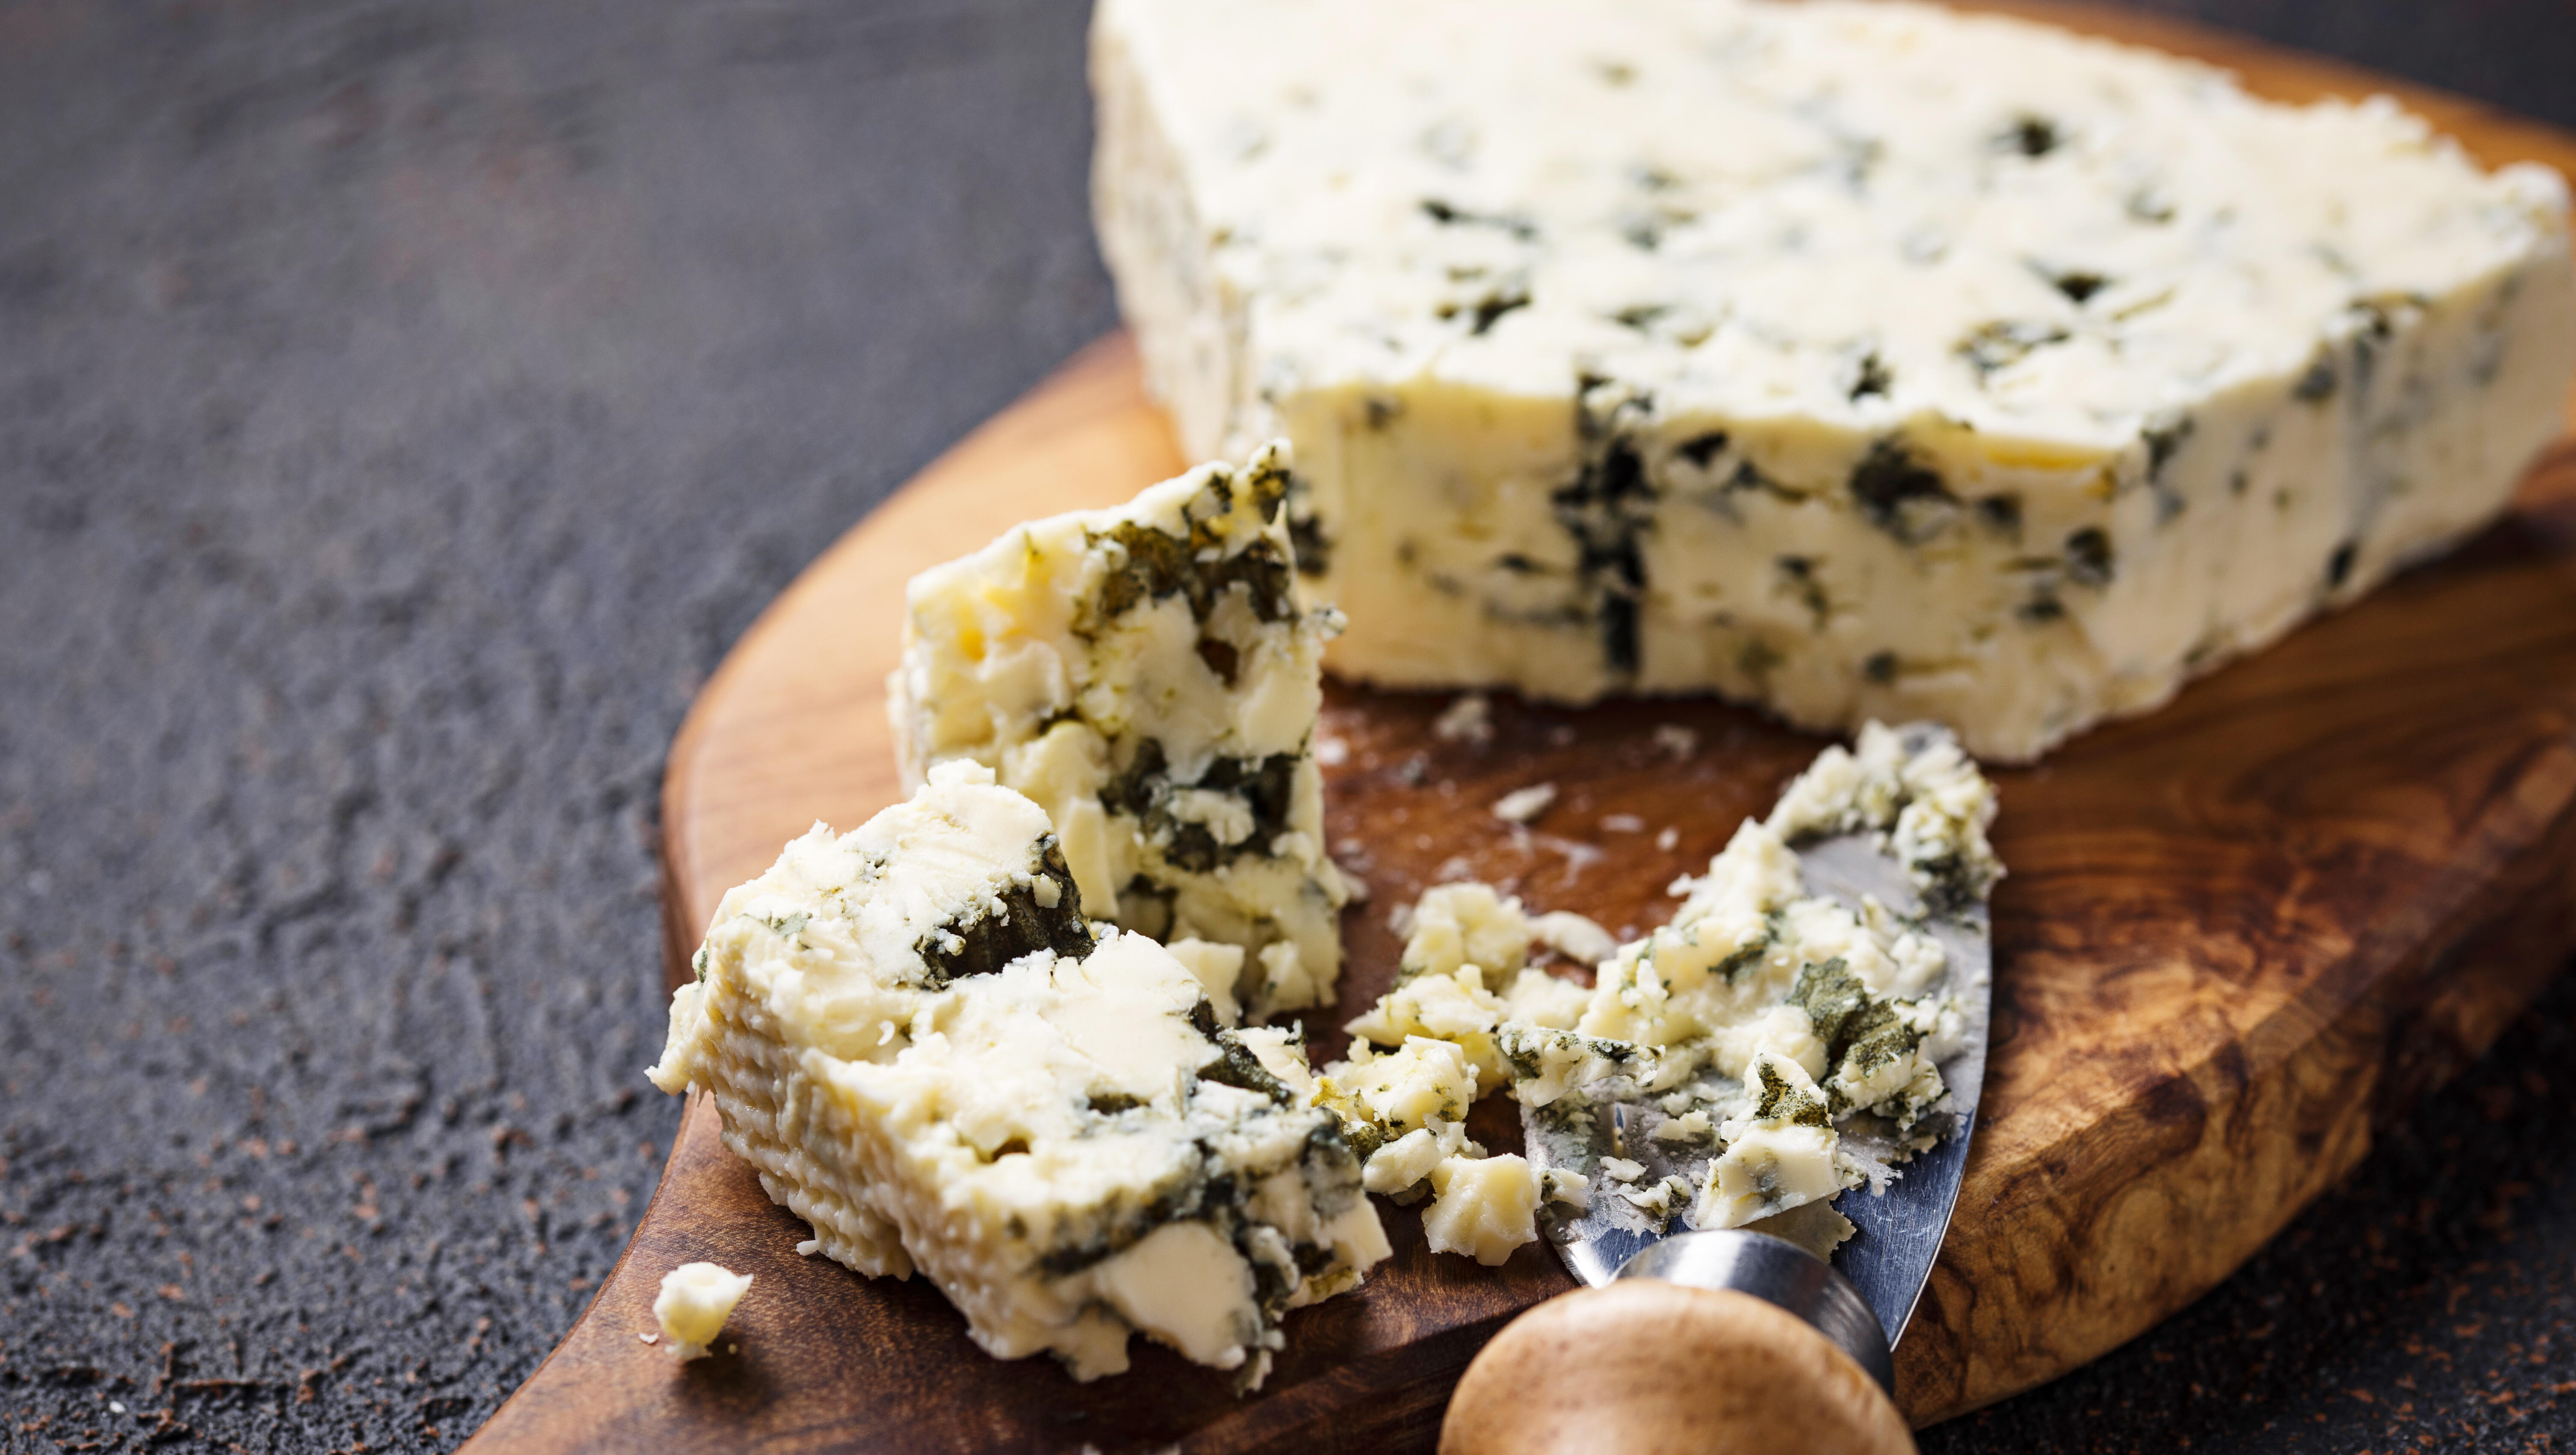 #TastyTuesday - The Drought is affecting France's Oldest Cheeses